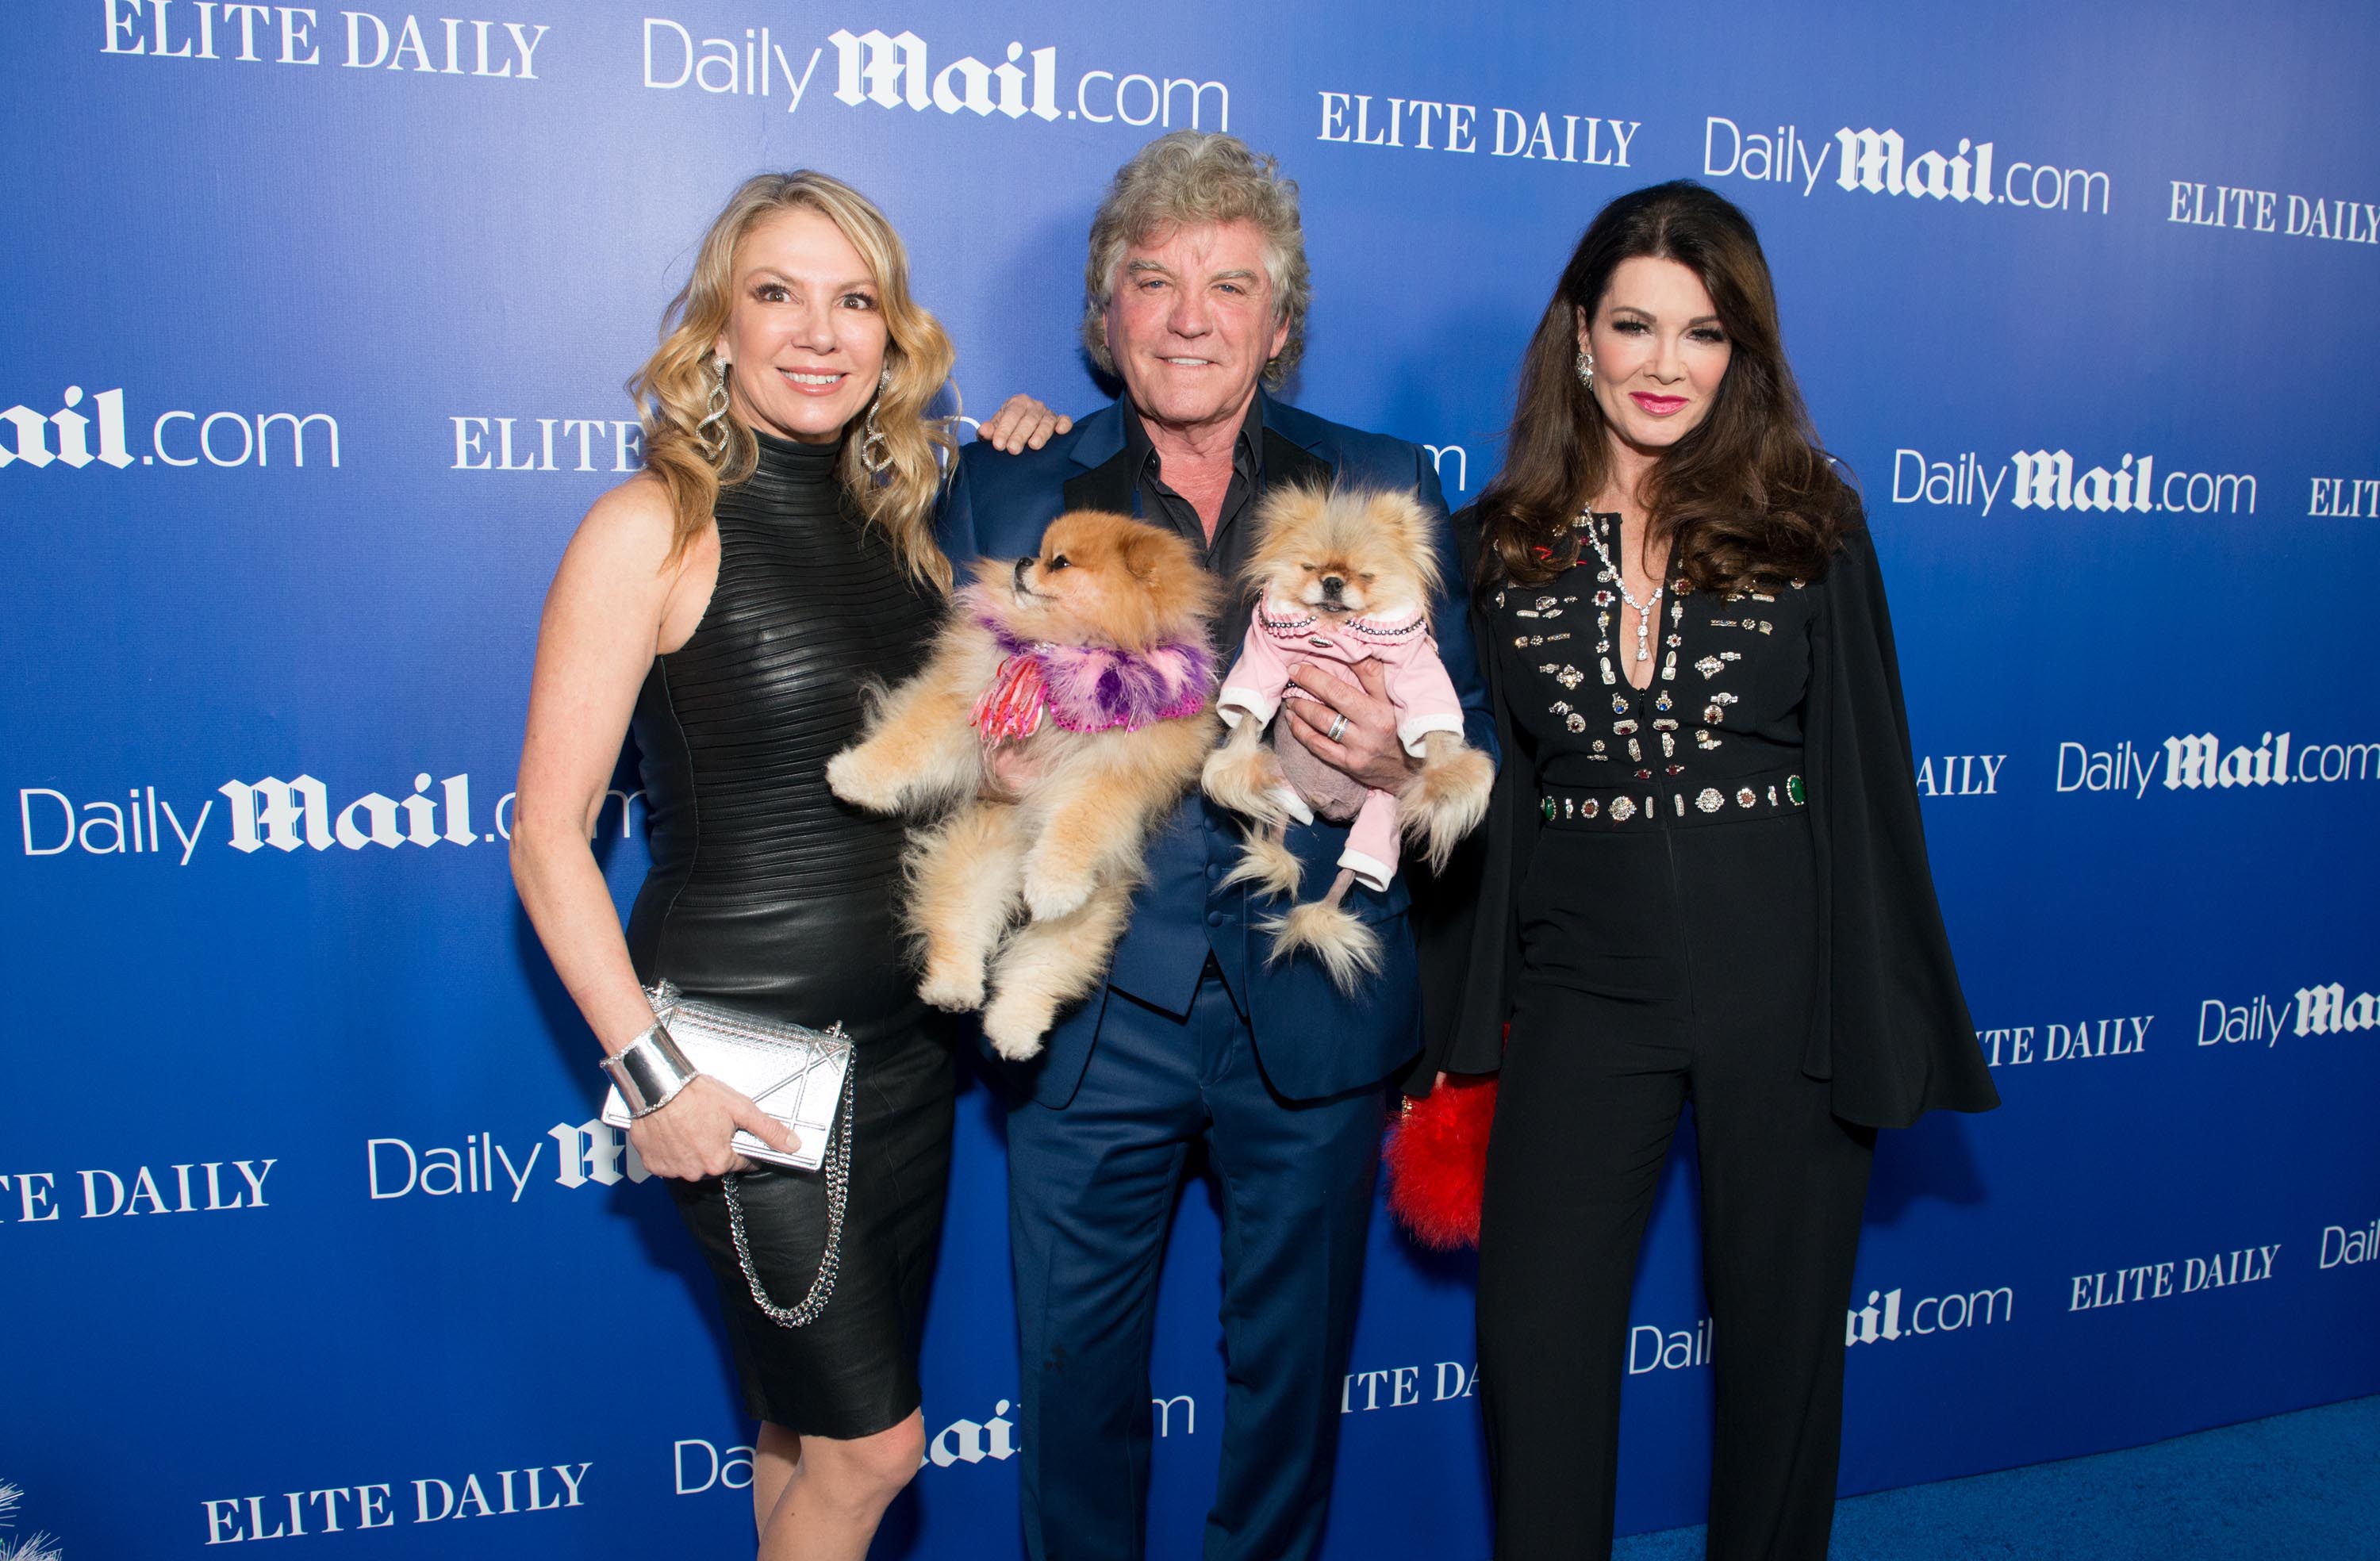 Ramona Singer attends the DailyMail.com & Elite Daily Holiday Party